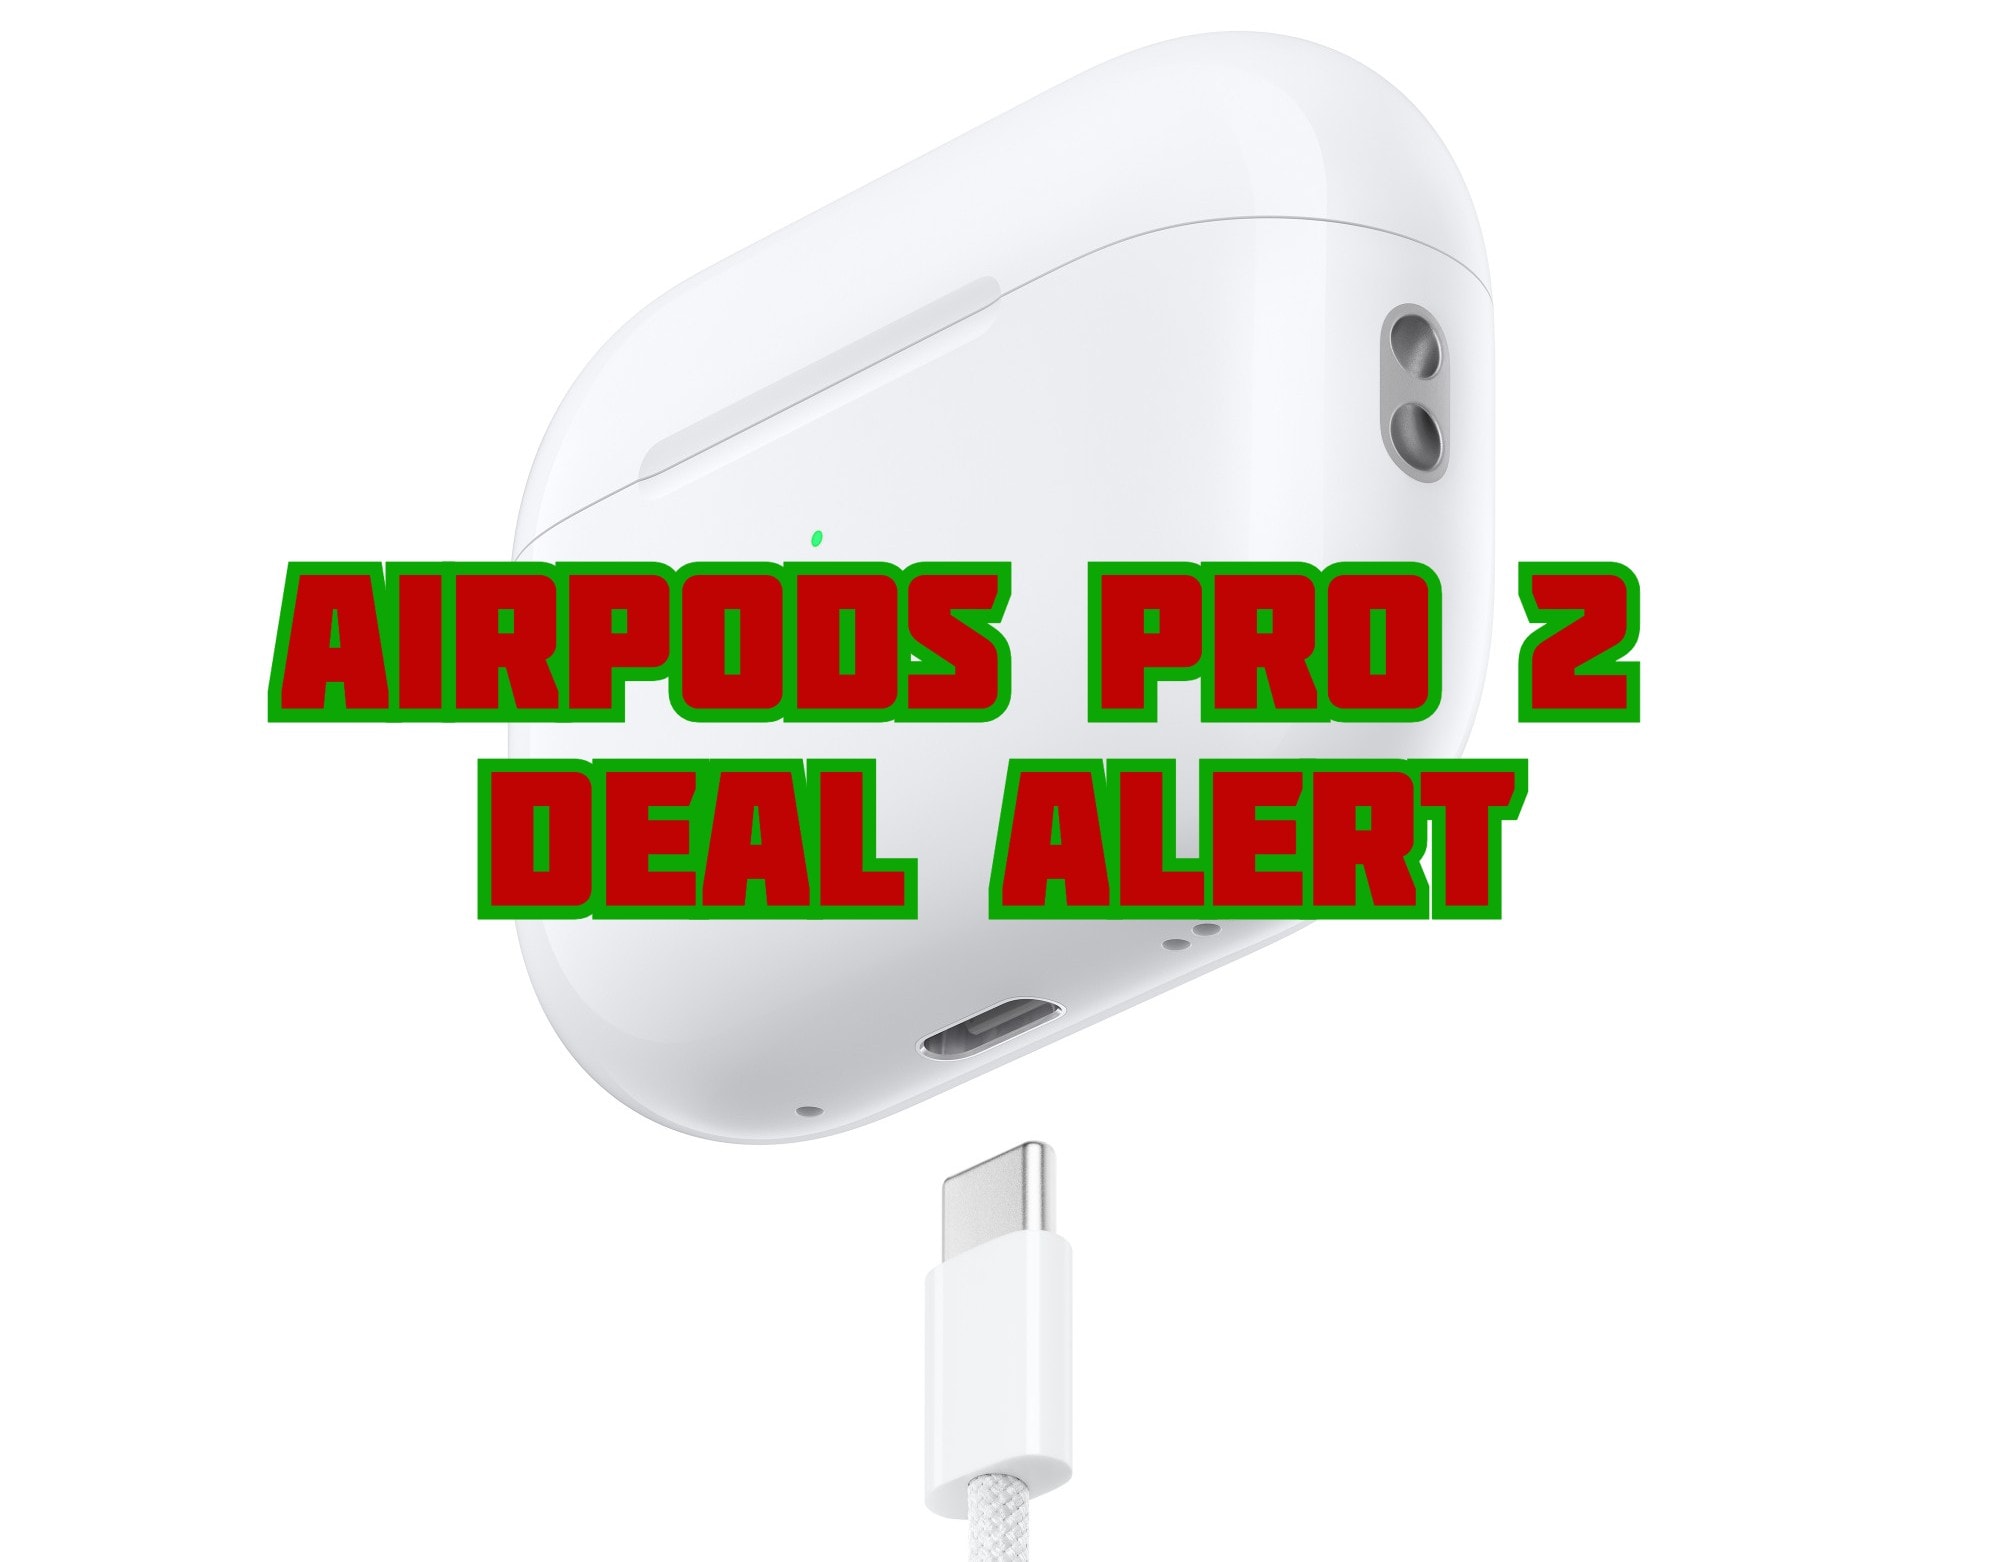 This AirPods Pro 2 sale comes with an extra you'll love